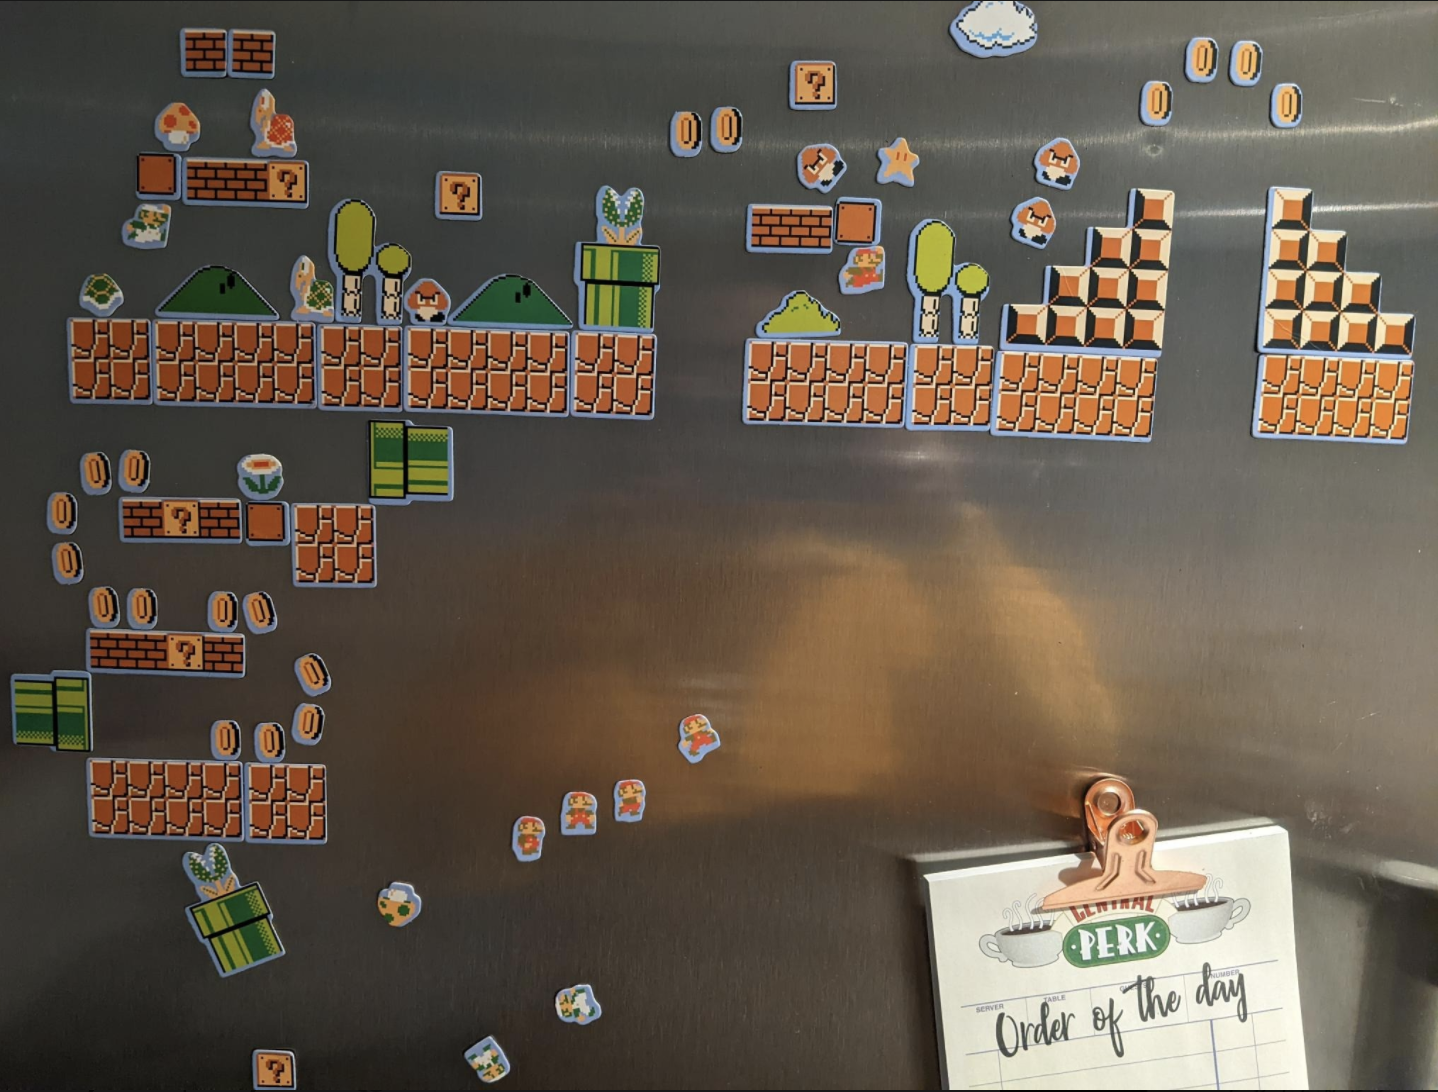 Super Mario Bros. magnets arranged on a stainless steel fridge